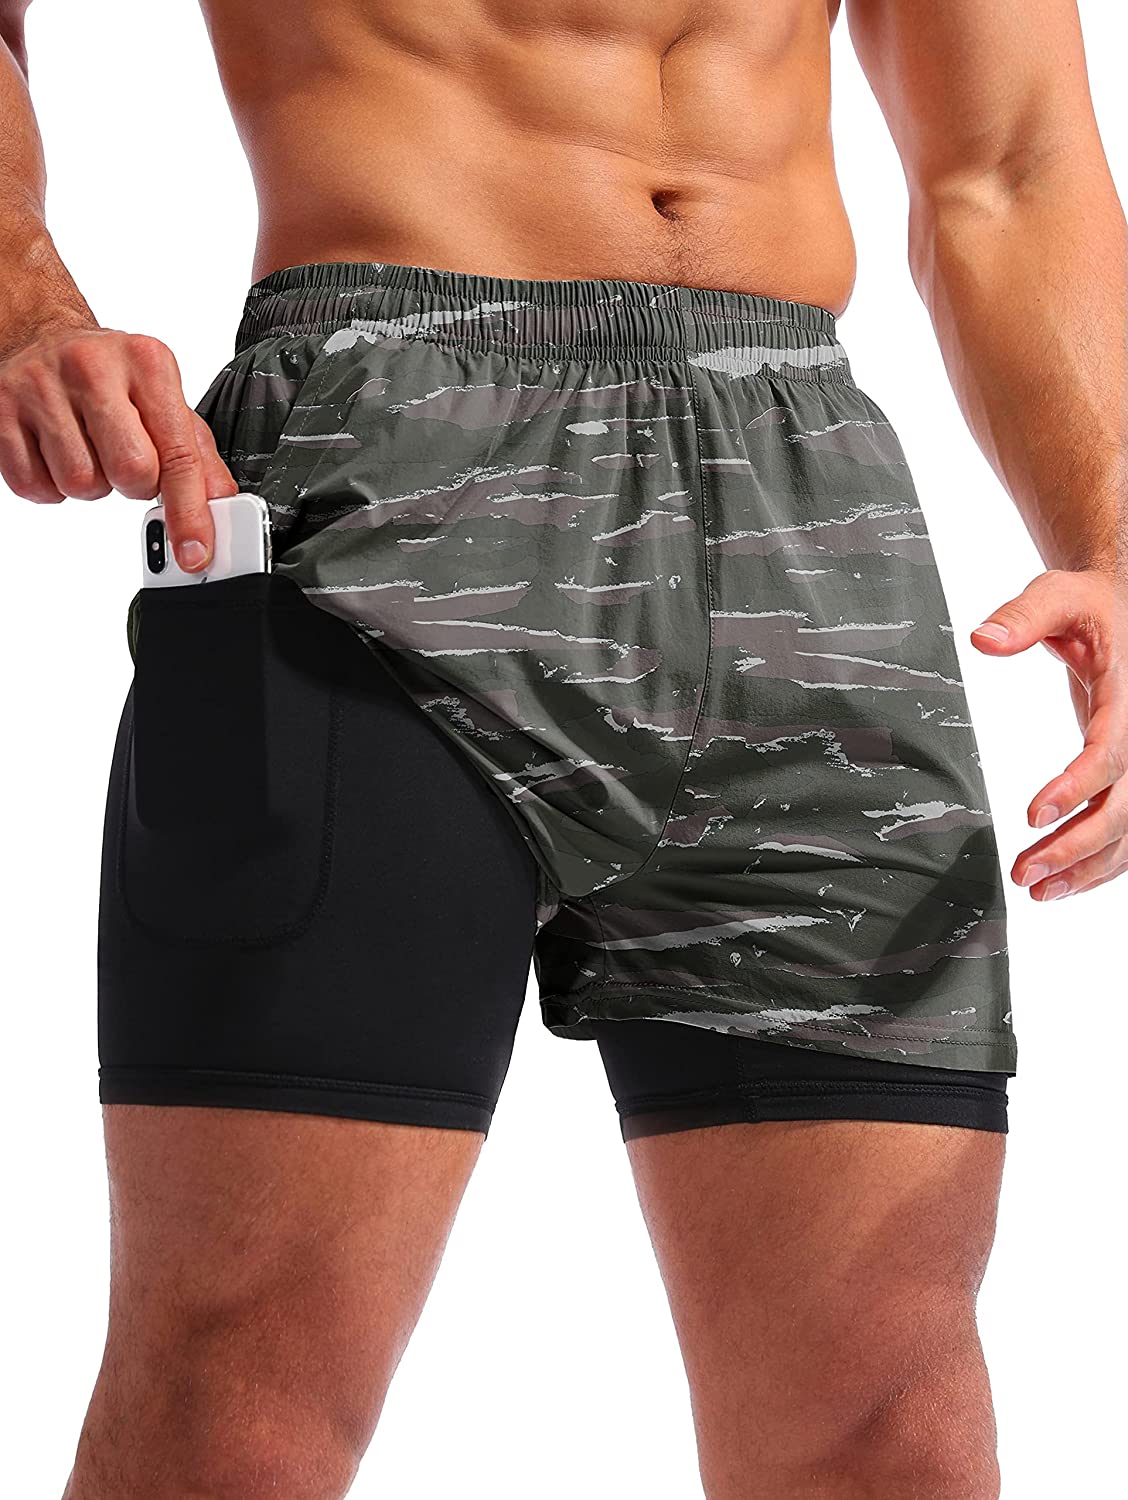 Pudolla Men's Running Shorts 3 Inch Quick Dry Gym Athletic Workout